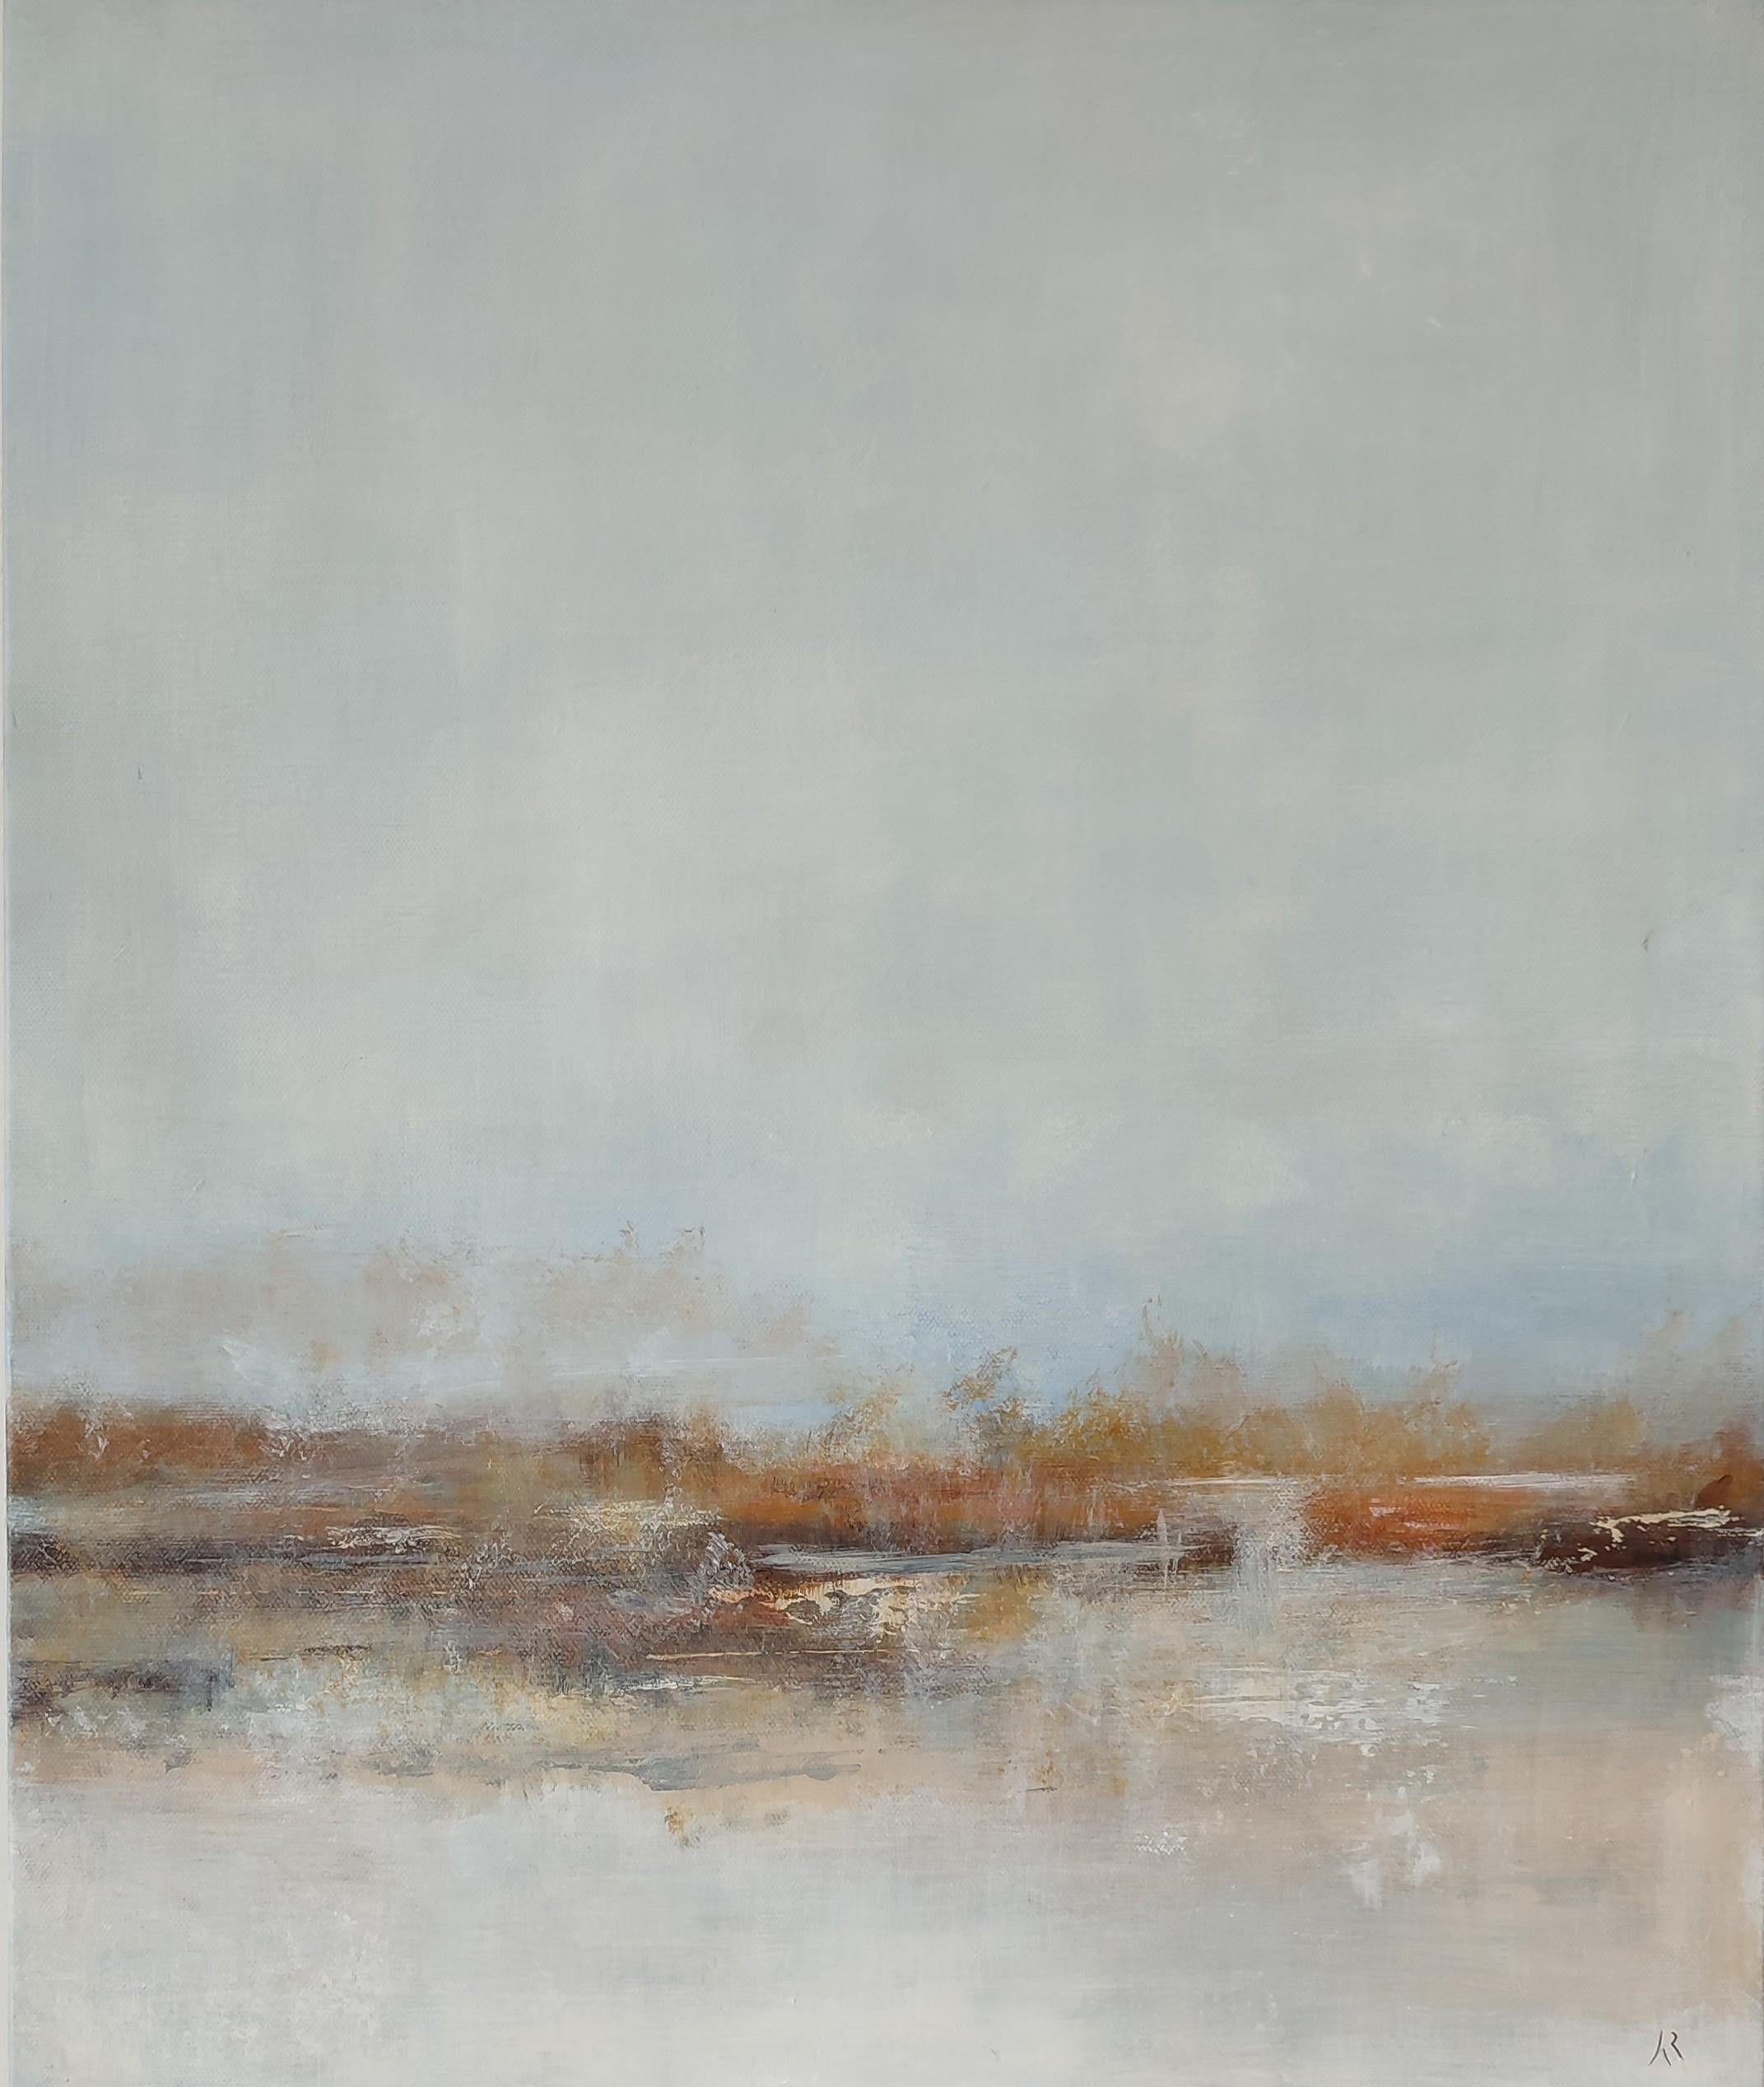 Anne Revol Abstract Painting - "The Dawn", Rust Earth in Early Morning's Pale Gray Abstract Landscape Painting